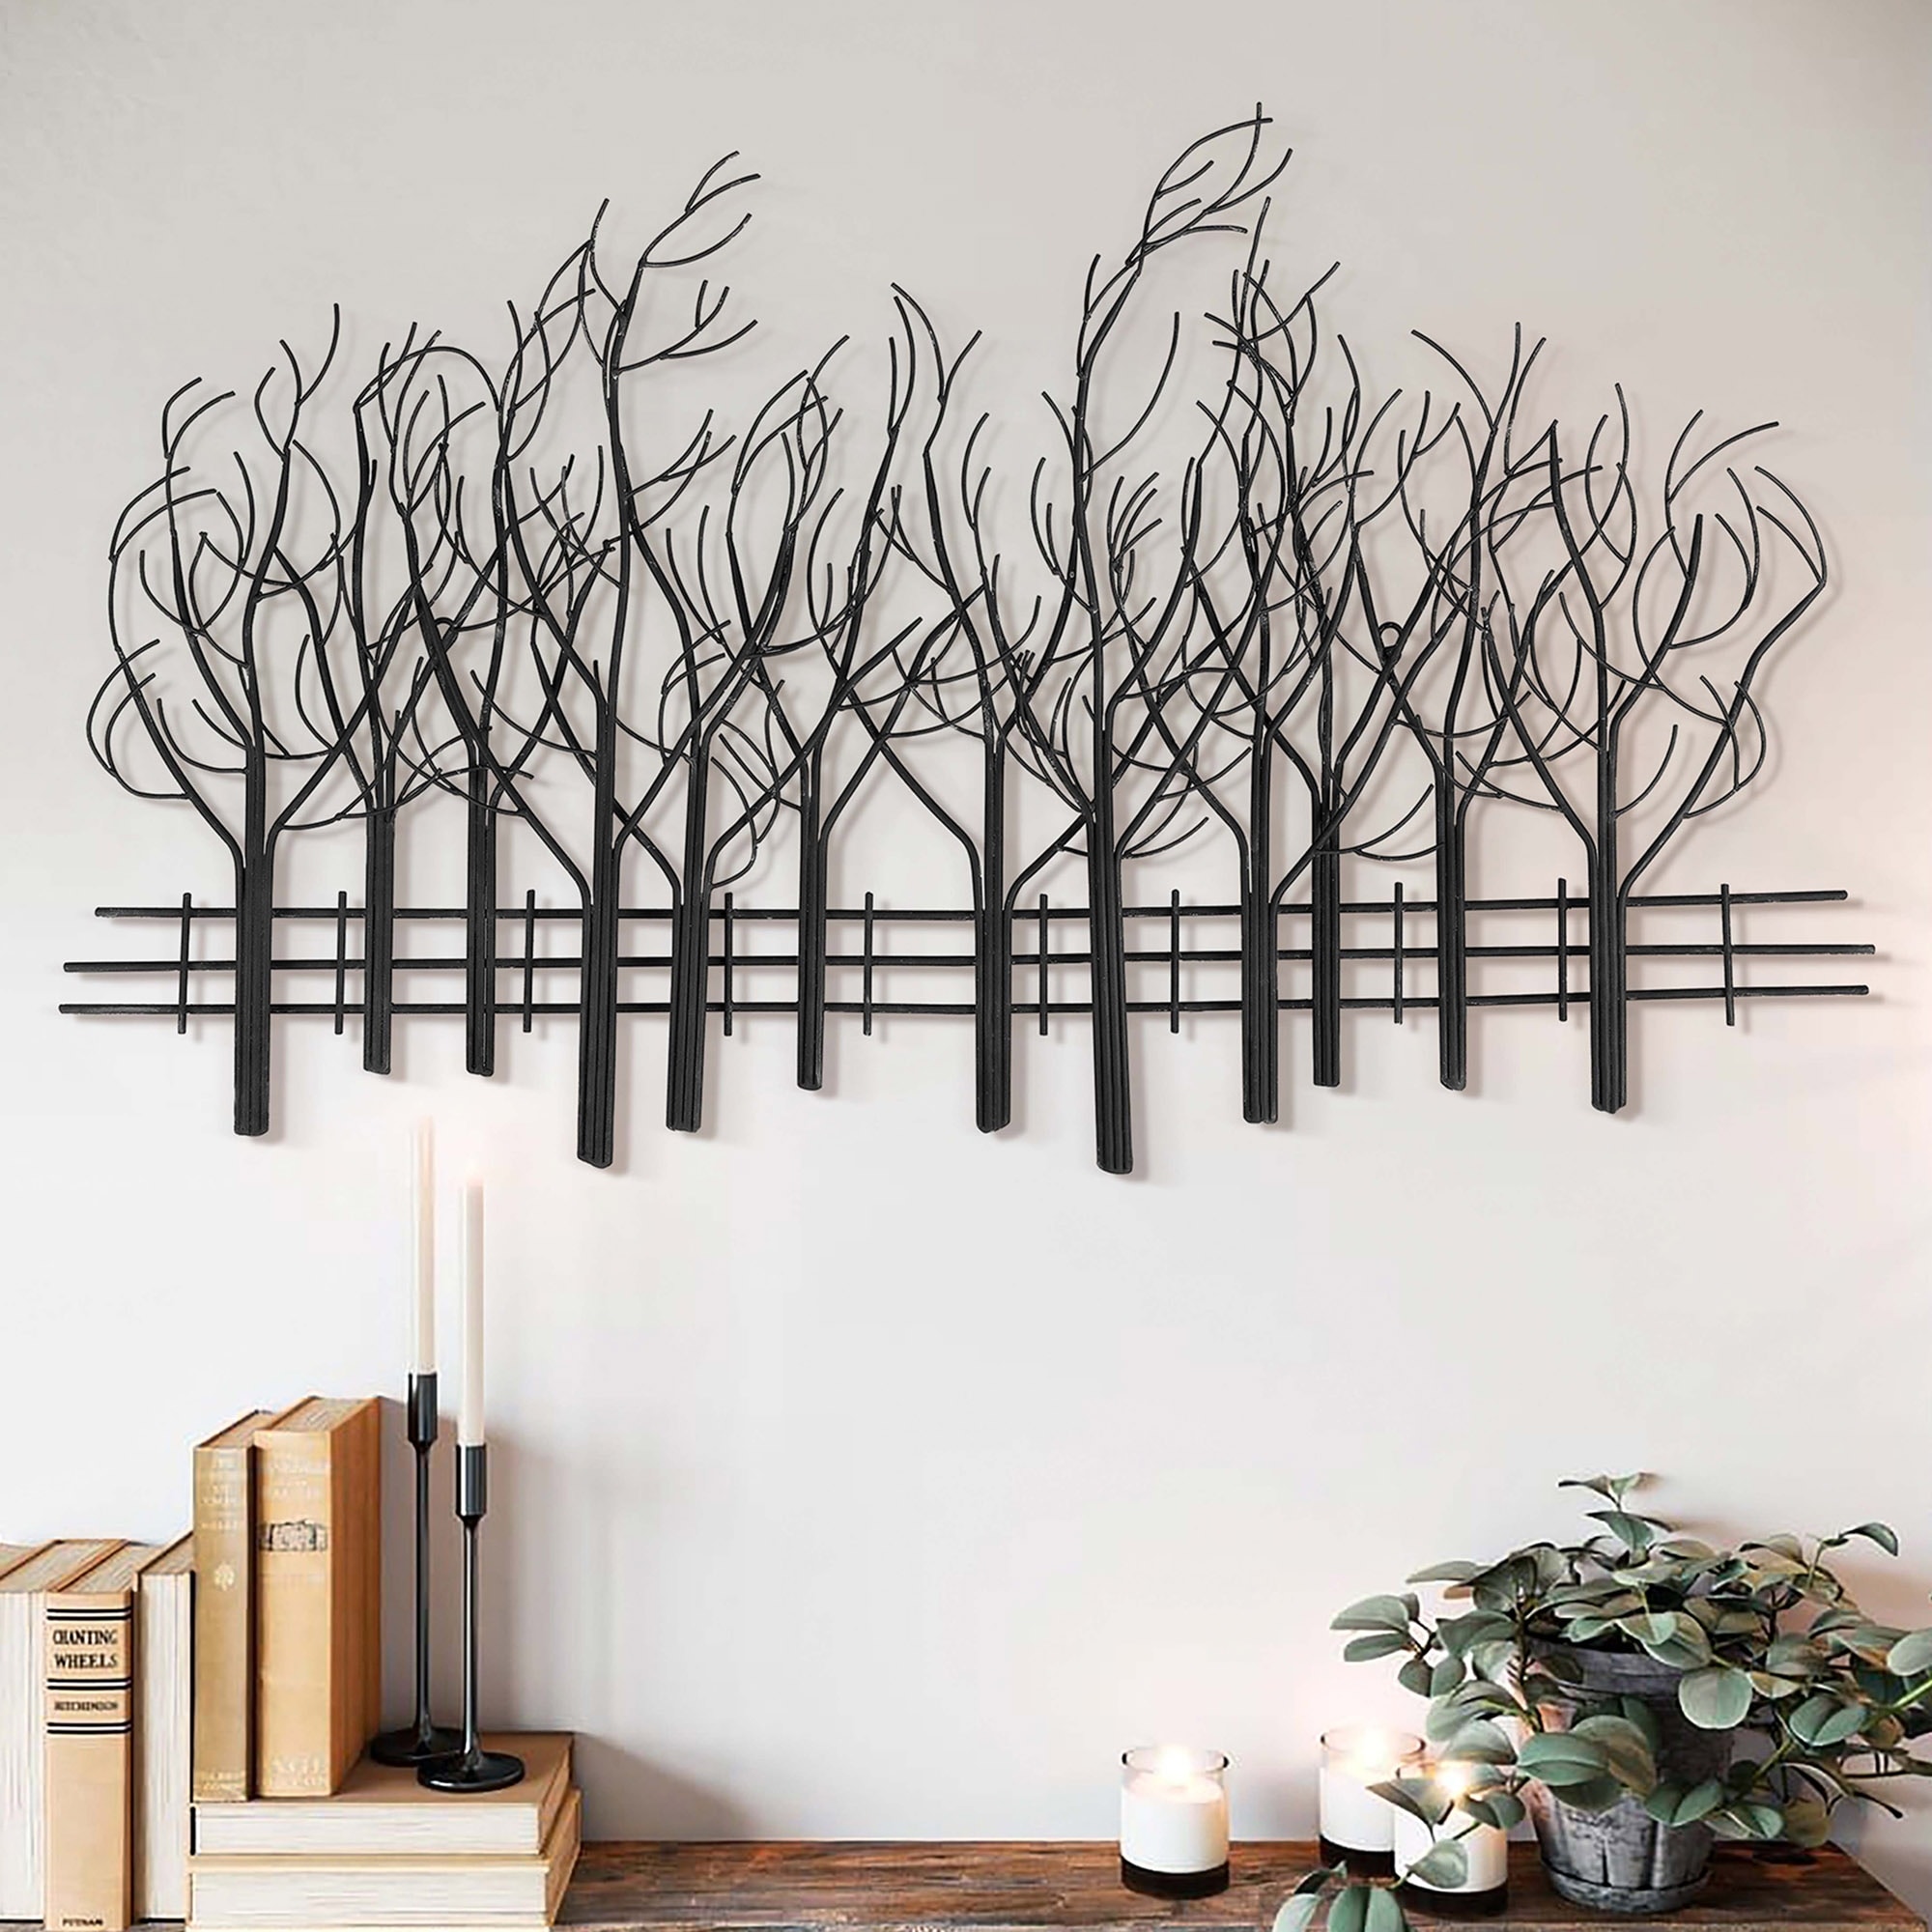 Black Wall Accents - Bed Bath & Beyond